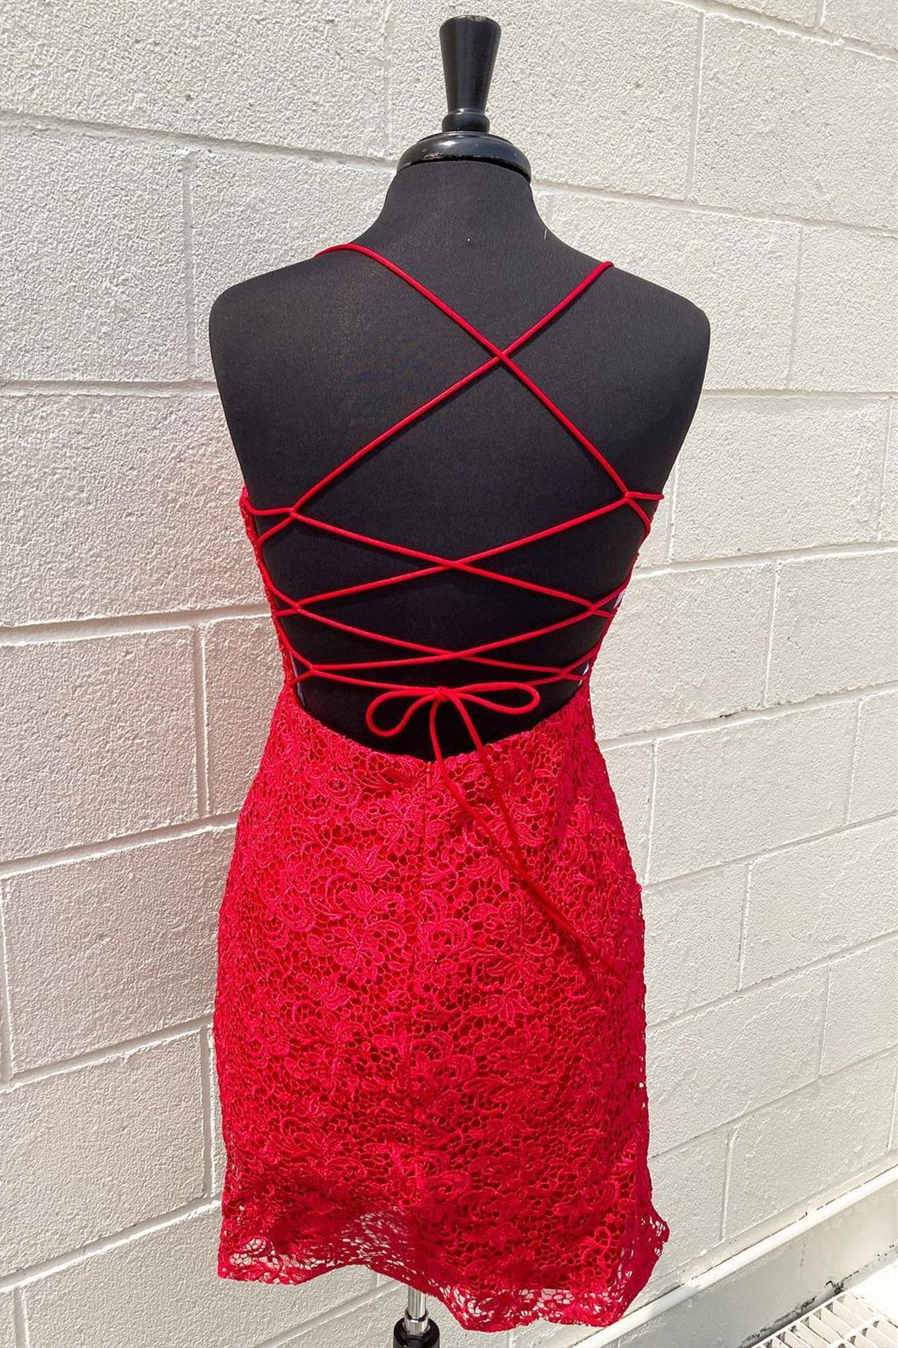 Red Lace Tight Homecoming Dress Tie Back Short Prom Dress,WD111 winkbridal